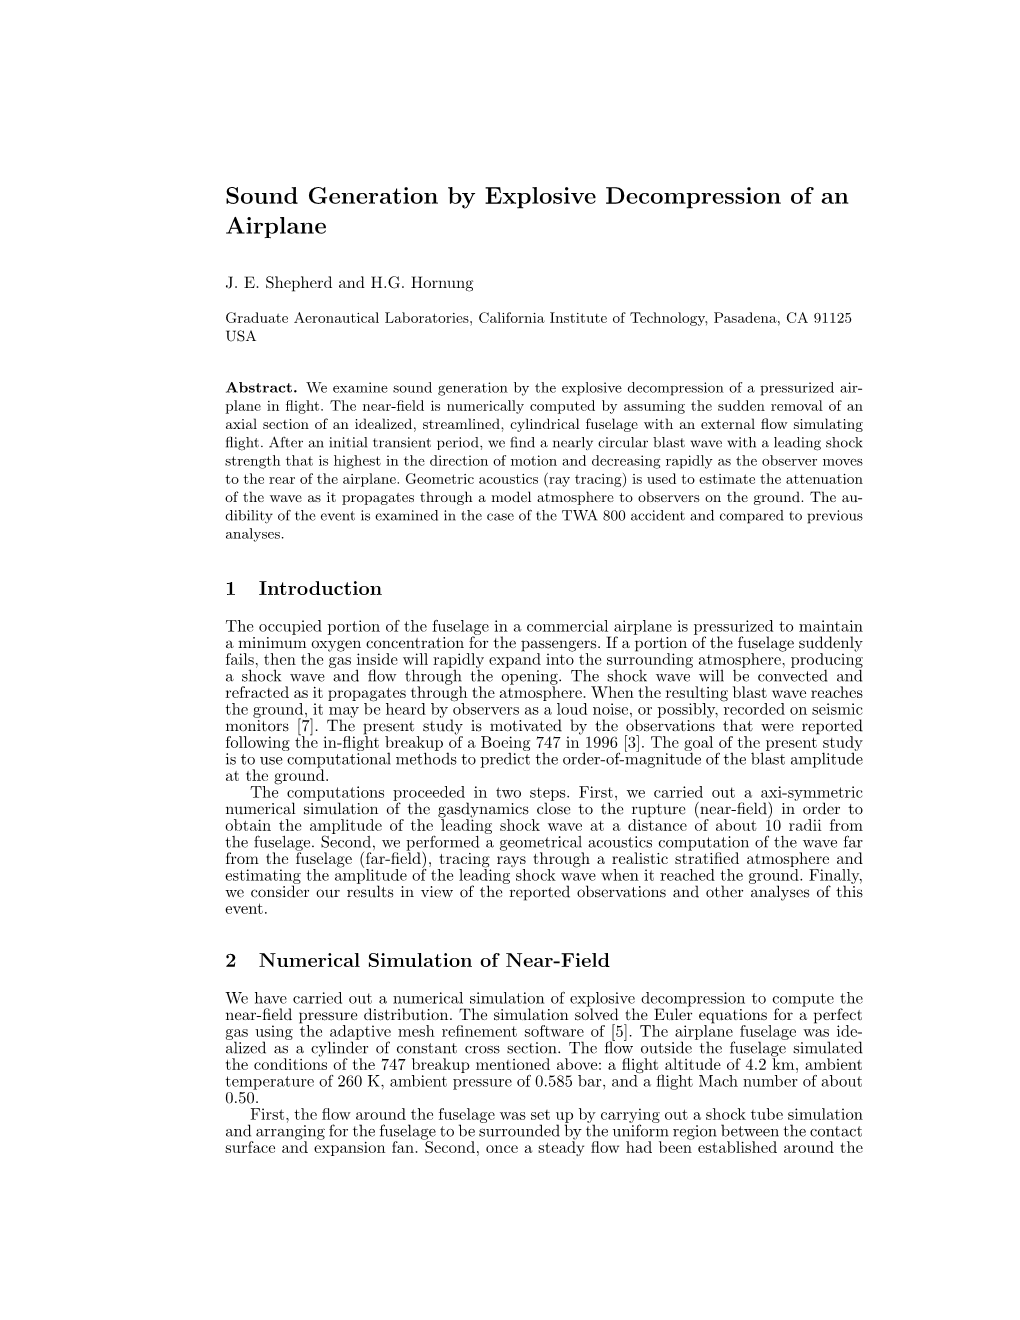 Sound Generation by Explosive Decompression of an Airplane